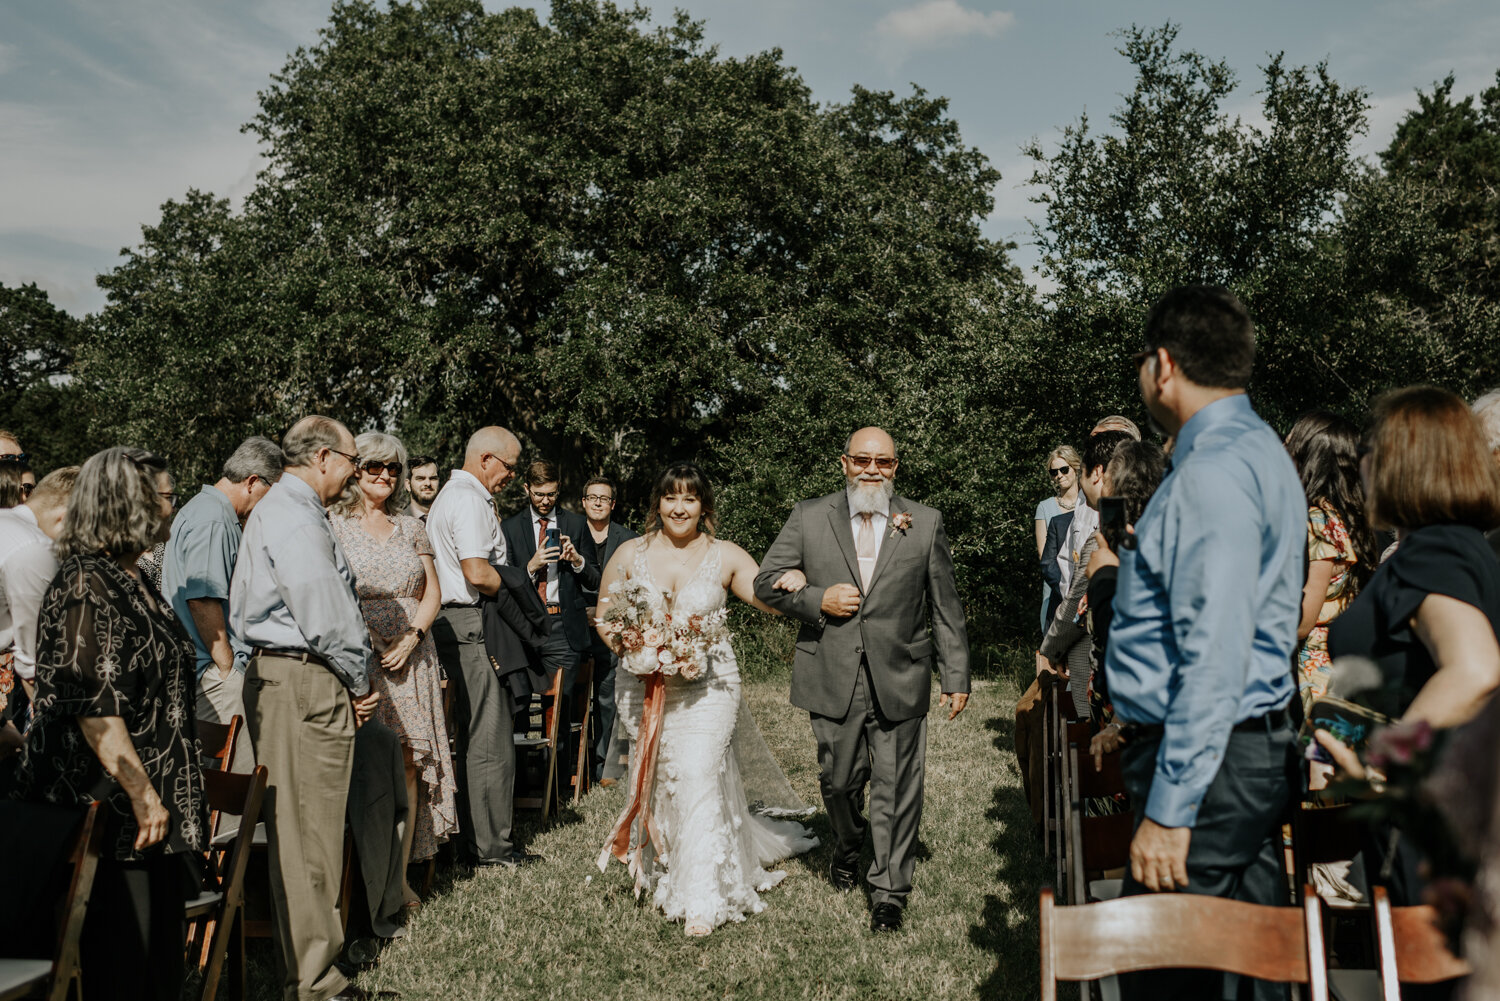 Wedding Ceremony at the Greenhouse in Driftwood, Austin, Texas